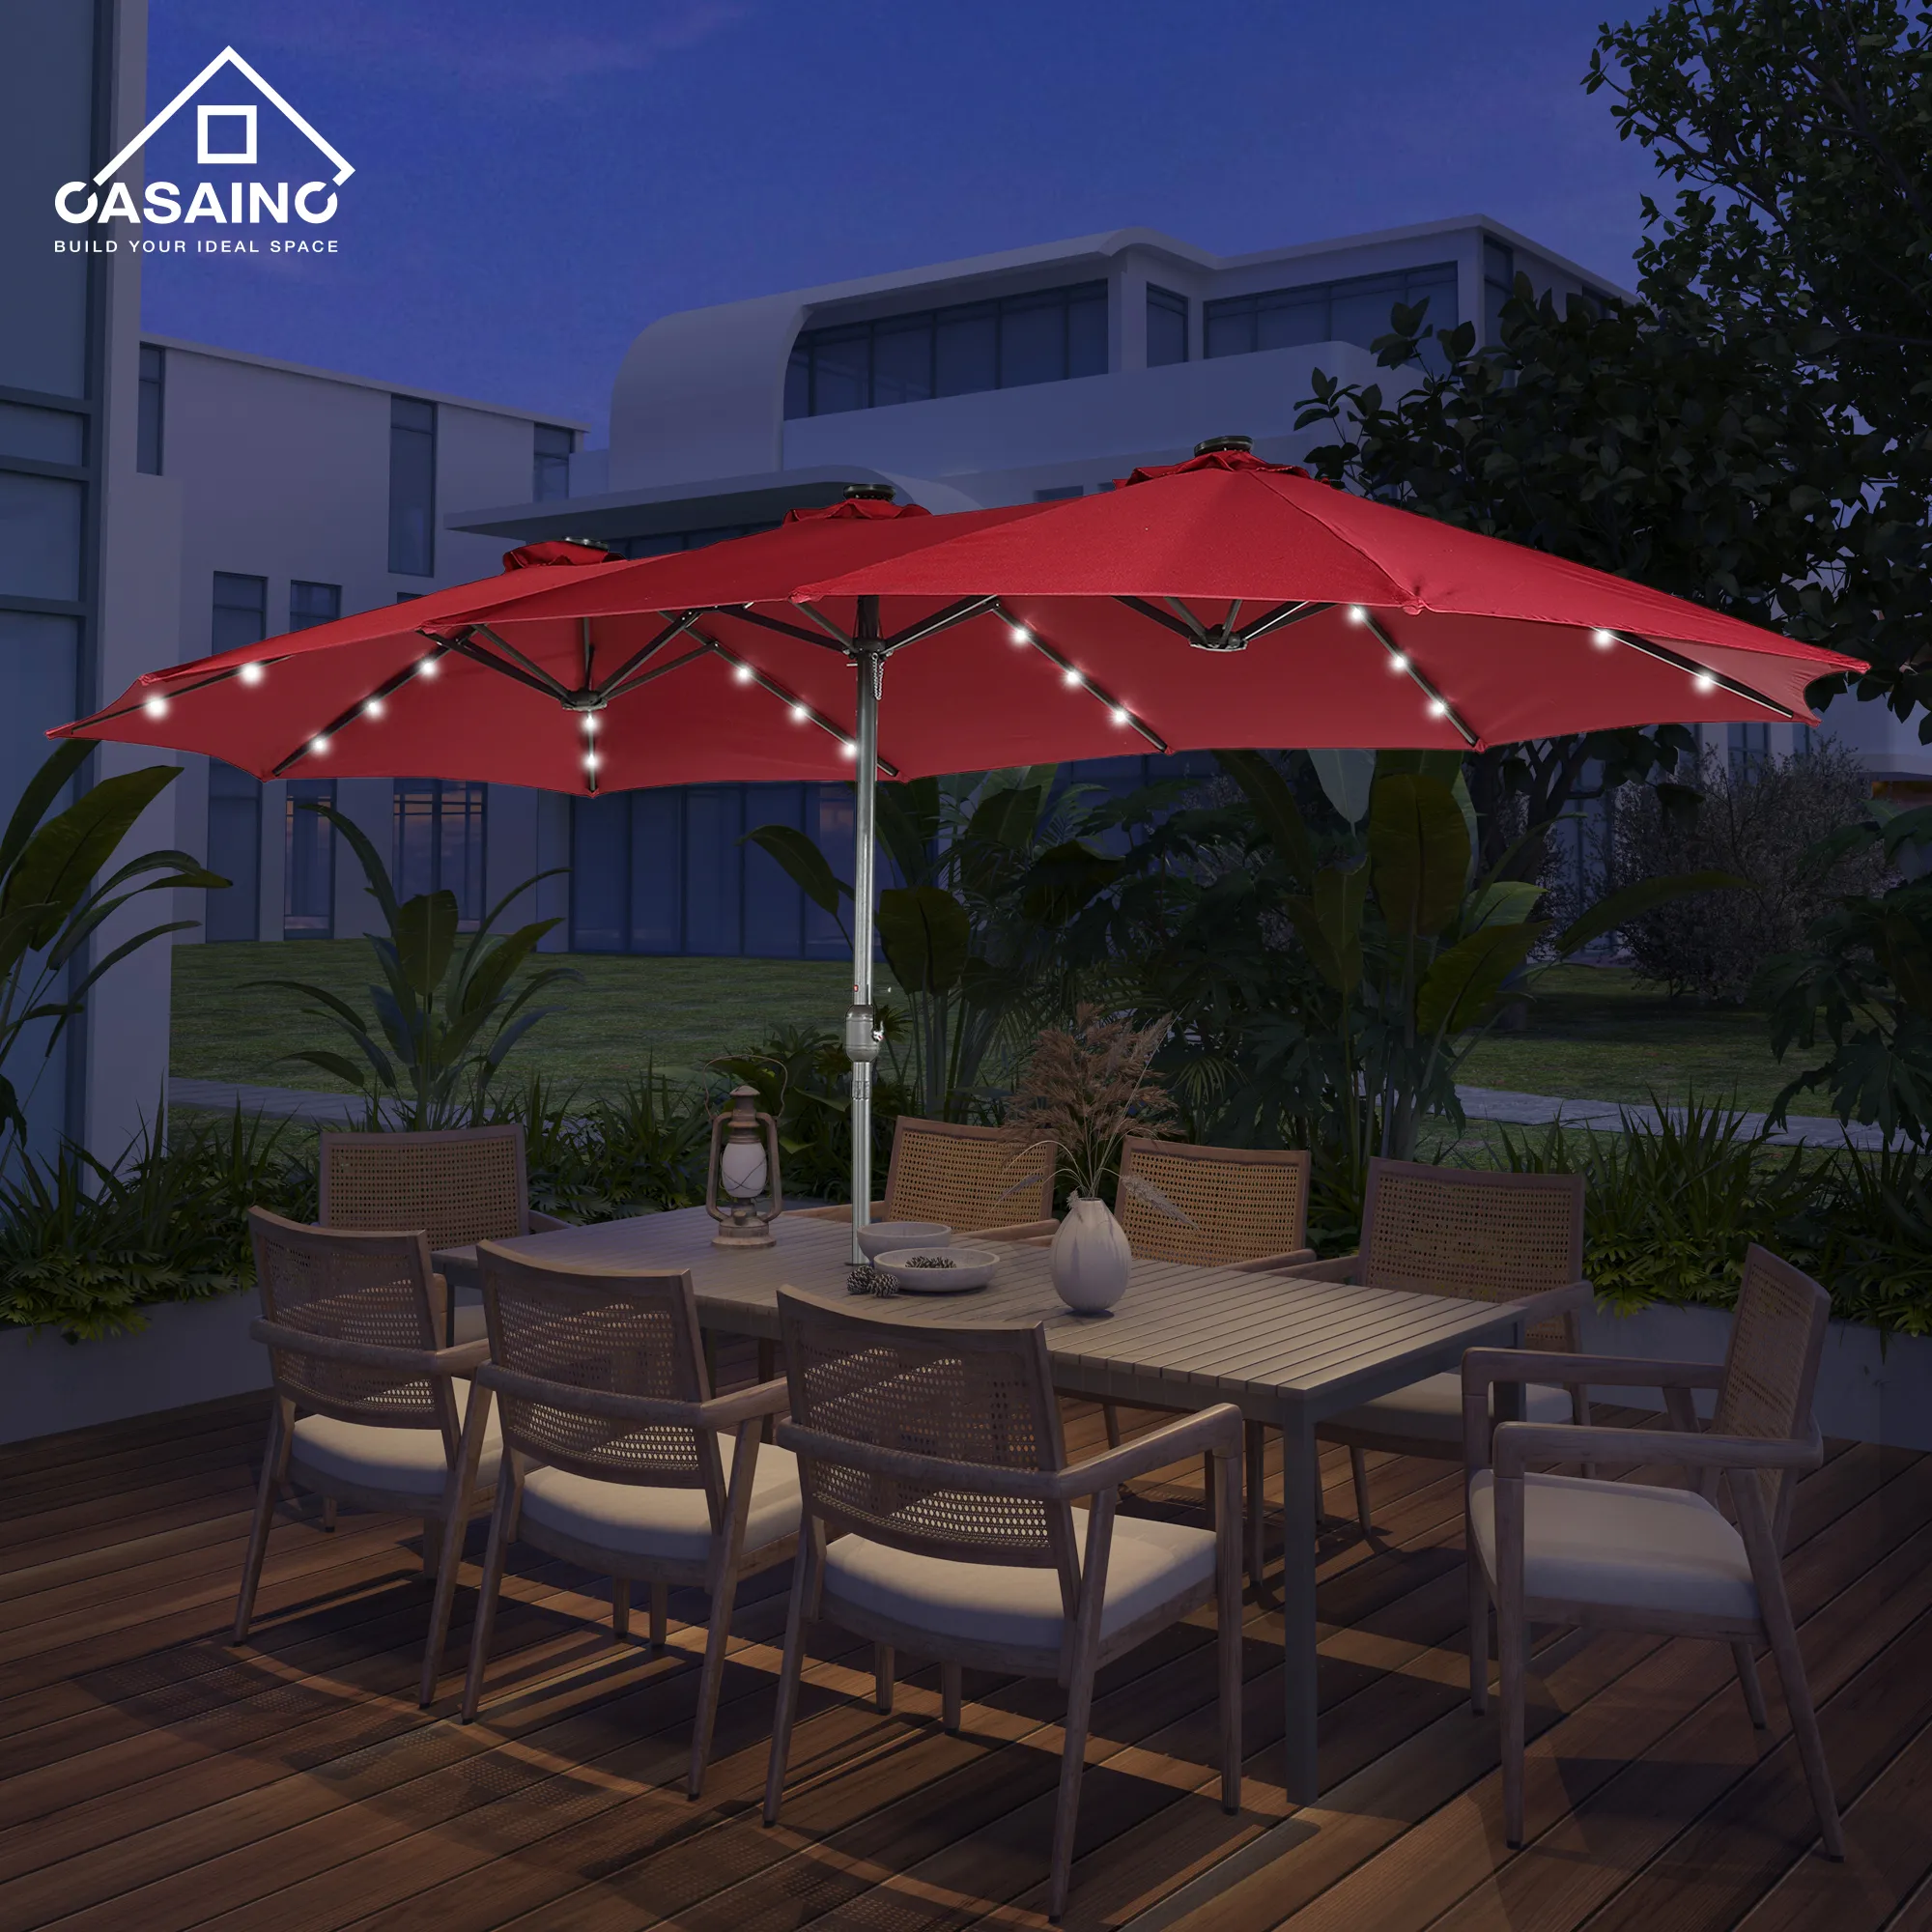 15ft Patio Maket Umbrella with base and led.